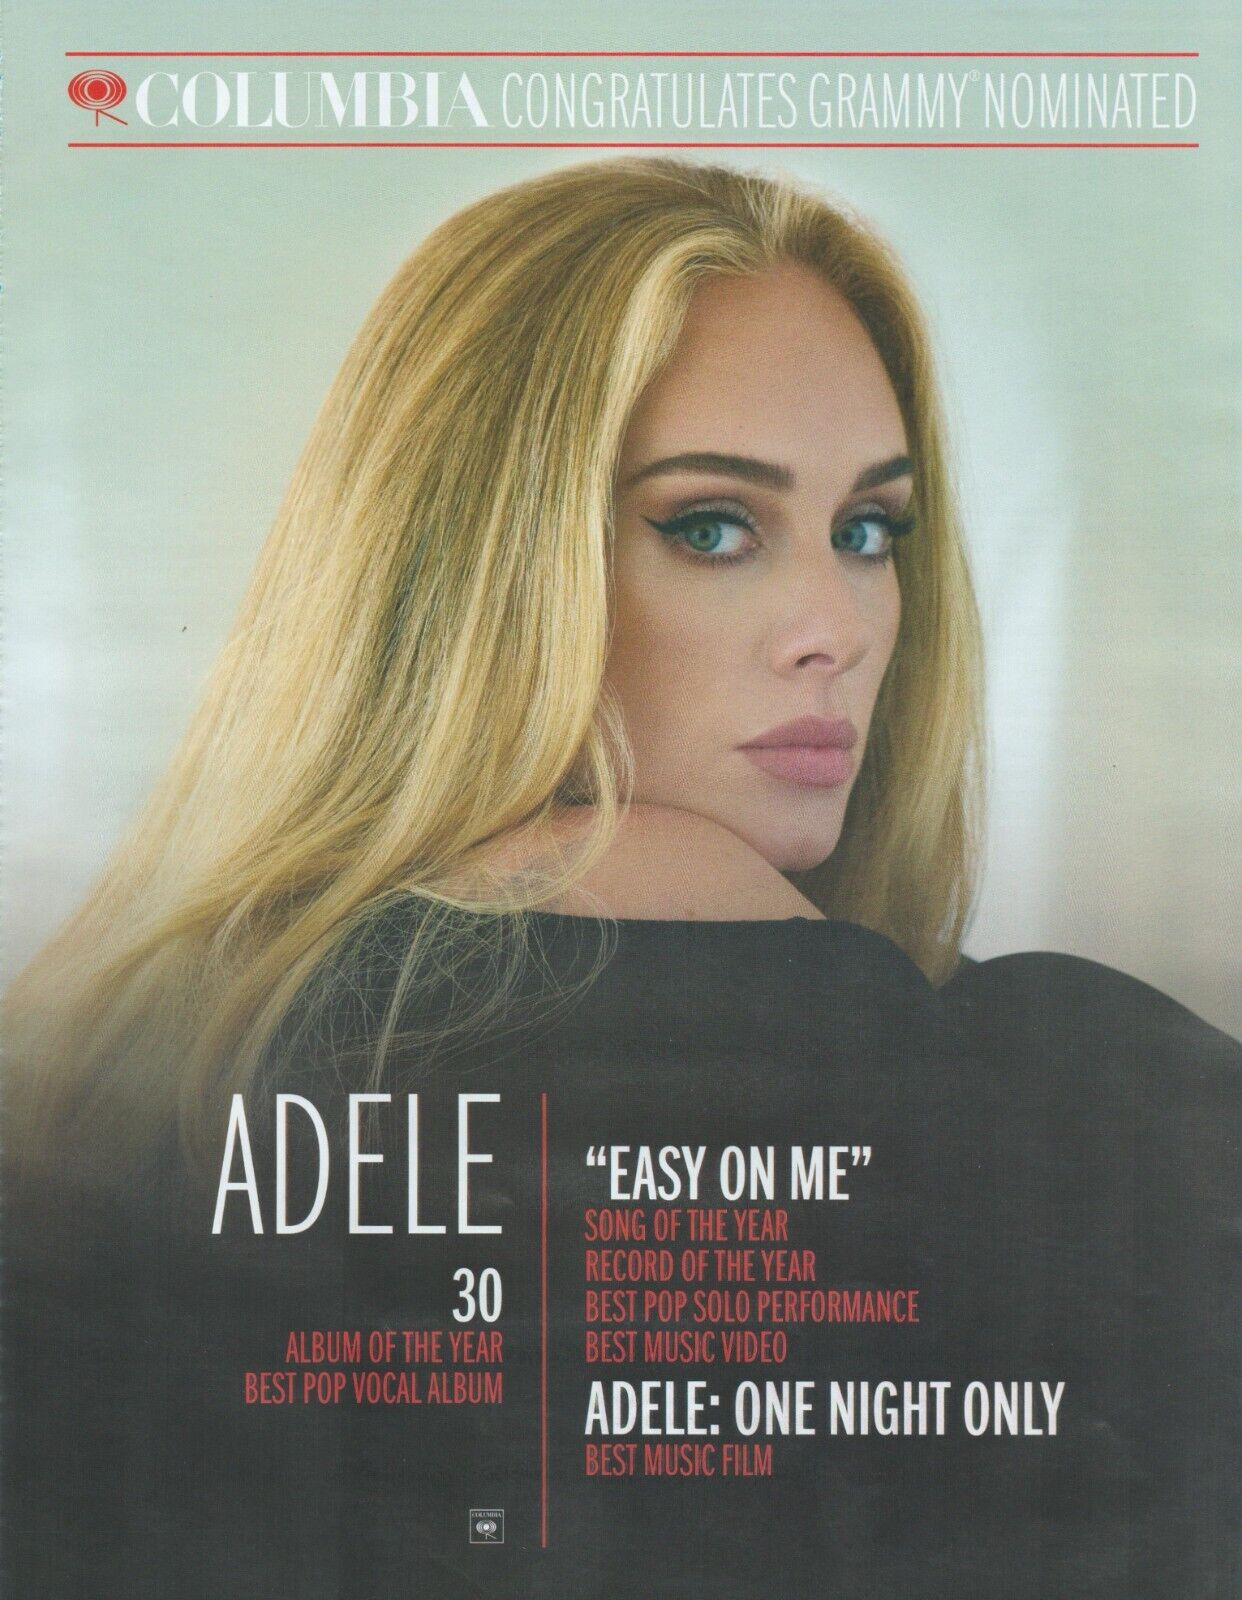 2022 ADELE Grammy Nomination PRINT AD Album of the Year EASY ON ME